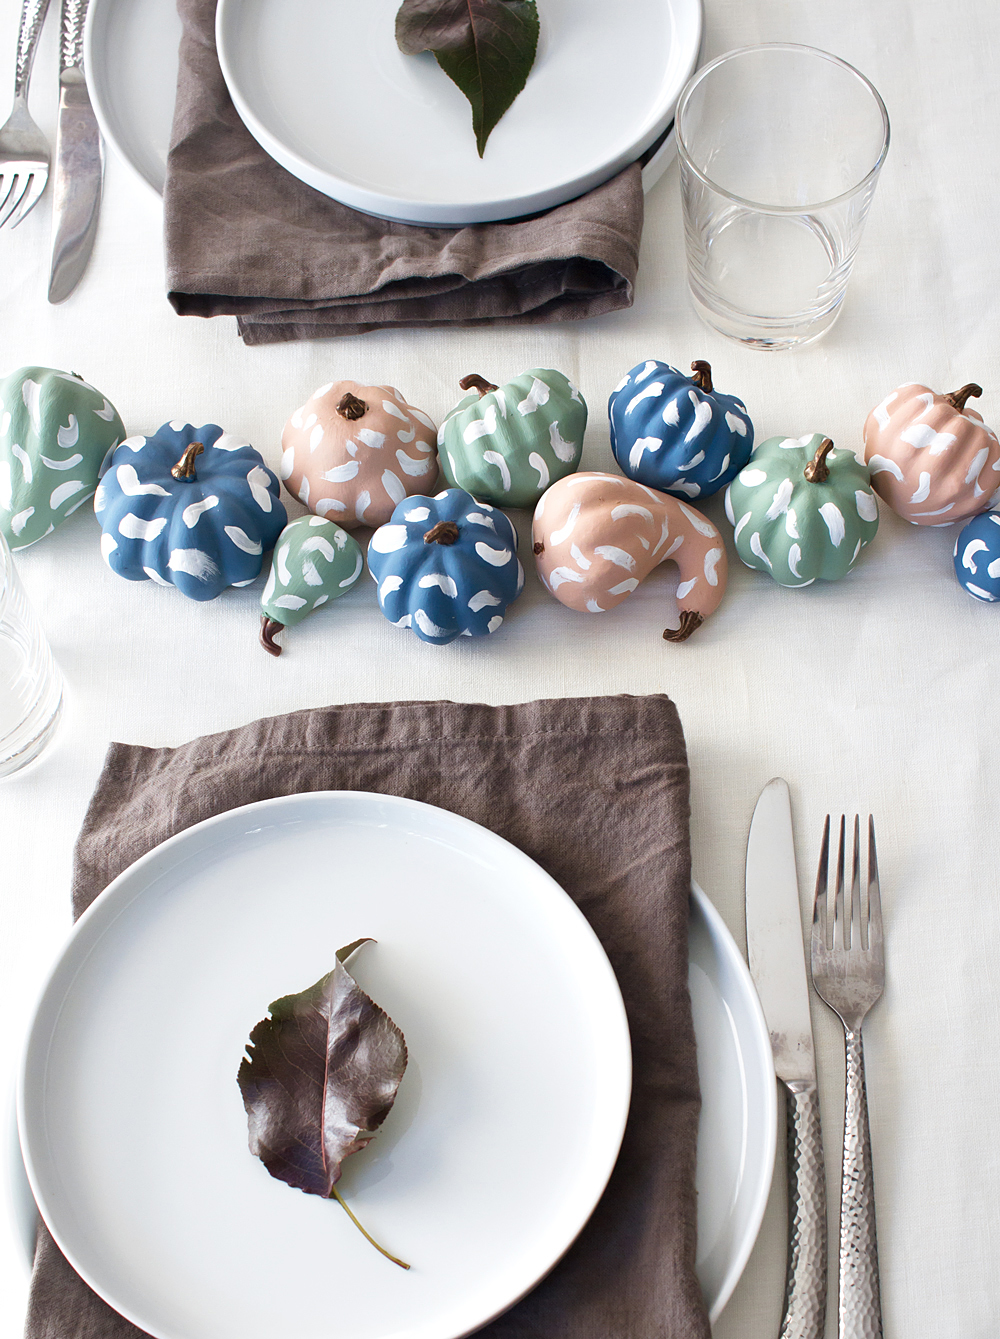 These easy DIY pastel brushstroke pumpkins make a beautiful Thanksgiving centerpiece, and would be fun for a colorful Halloween too! Click through for the free tutorial.